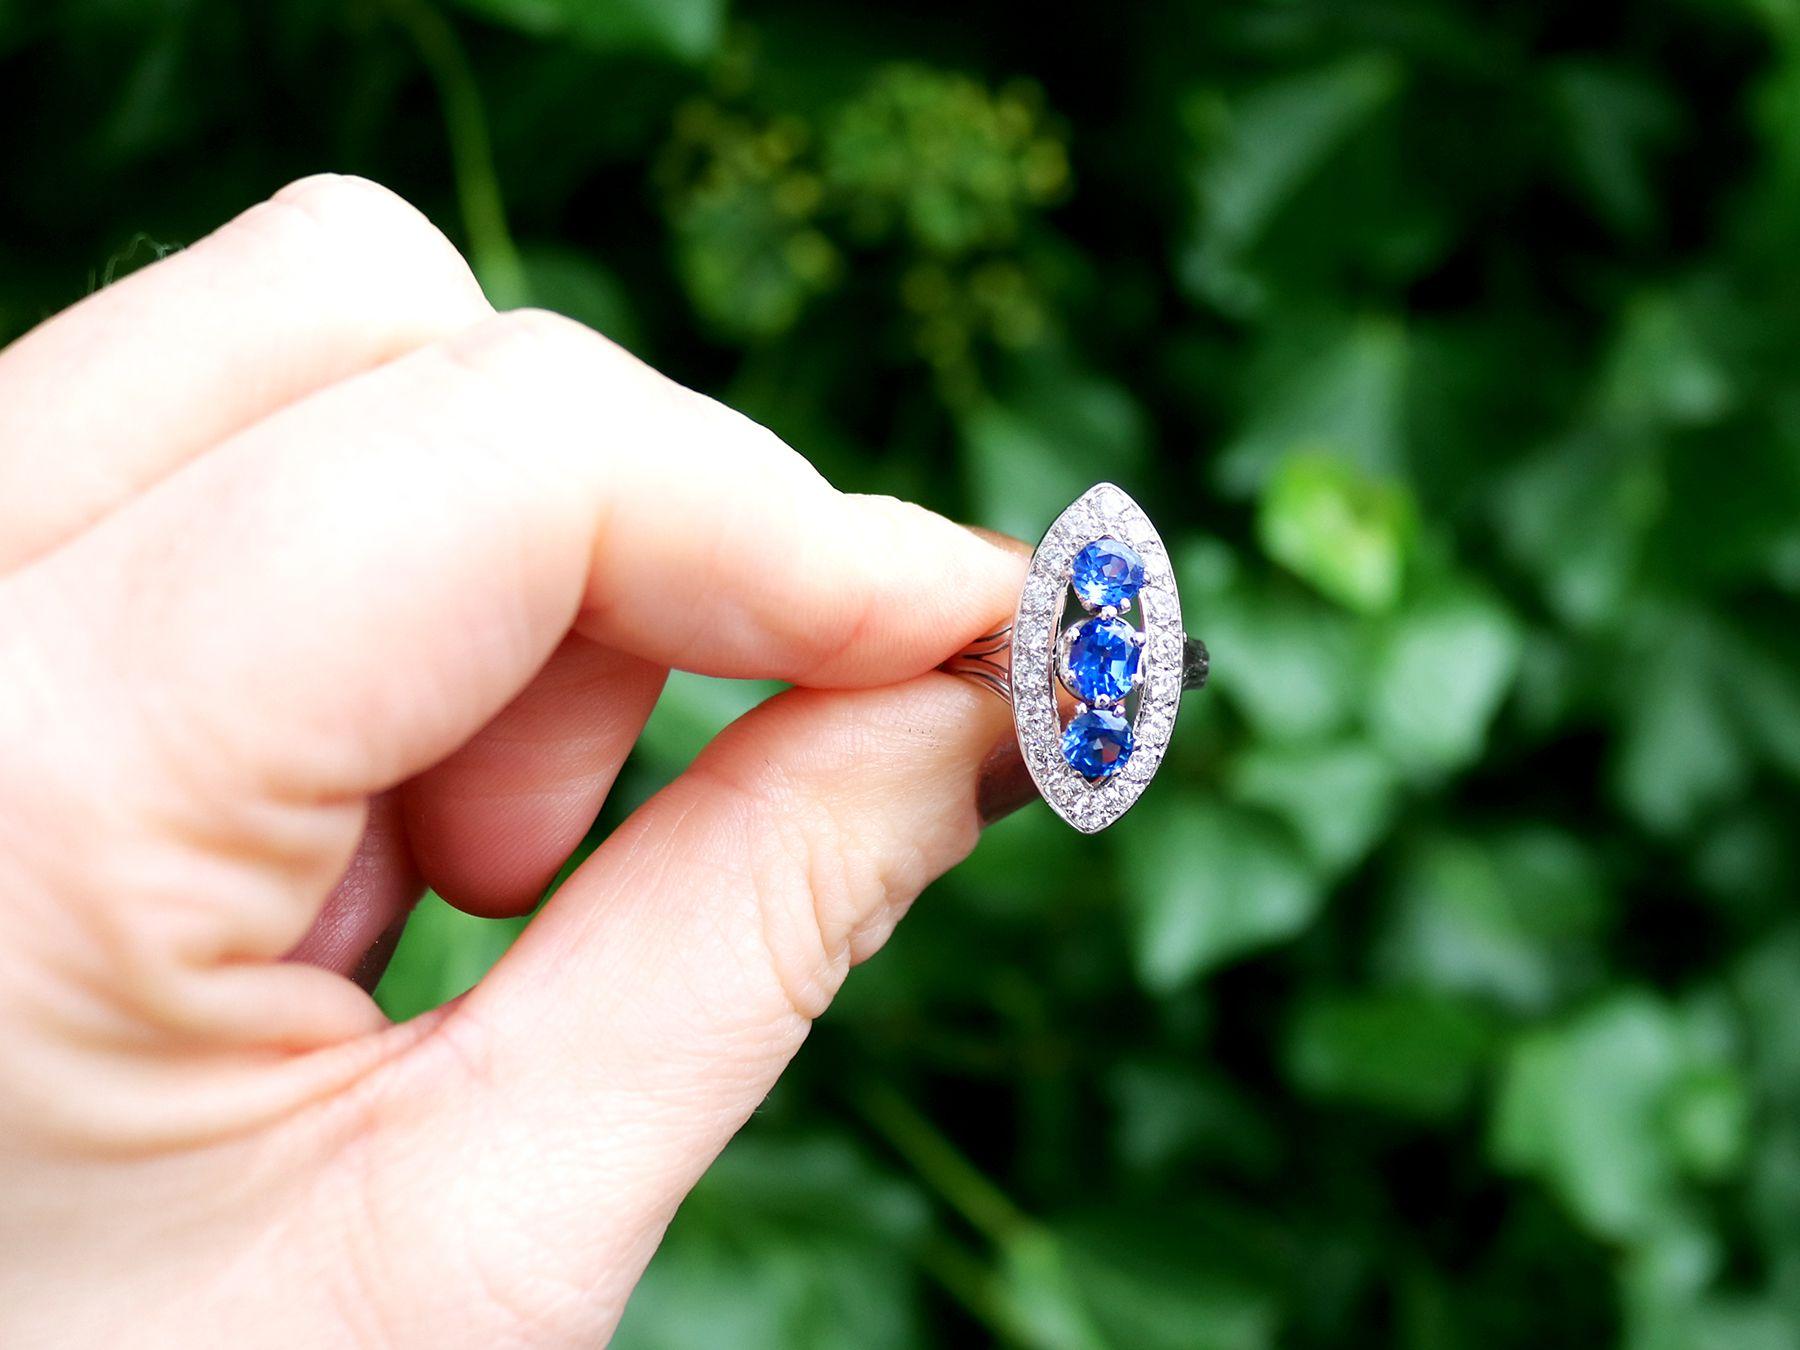 A stunning 1.60 carat sapphire and 1.05 carat diamond, 18 karat white gold marquise shape dress ring; part of our diverse vintage jewelry and estate jewelry collections.

This stunning, fine and impressive vintage sapphire and diamond ring has been